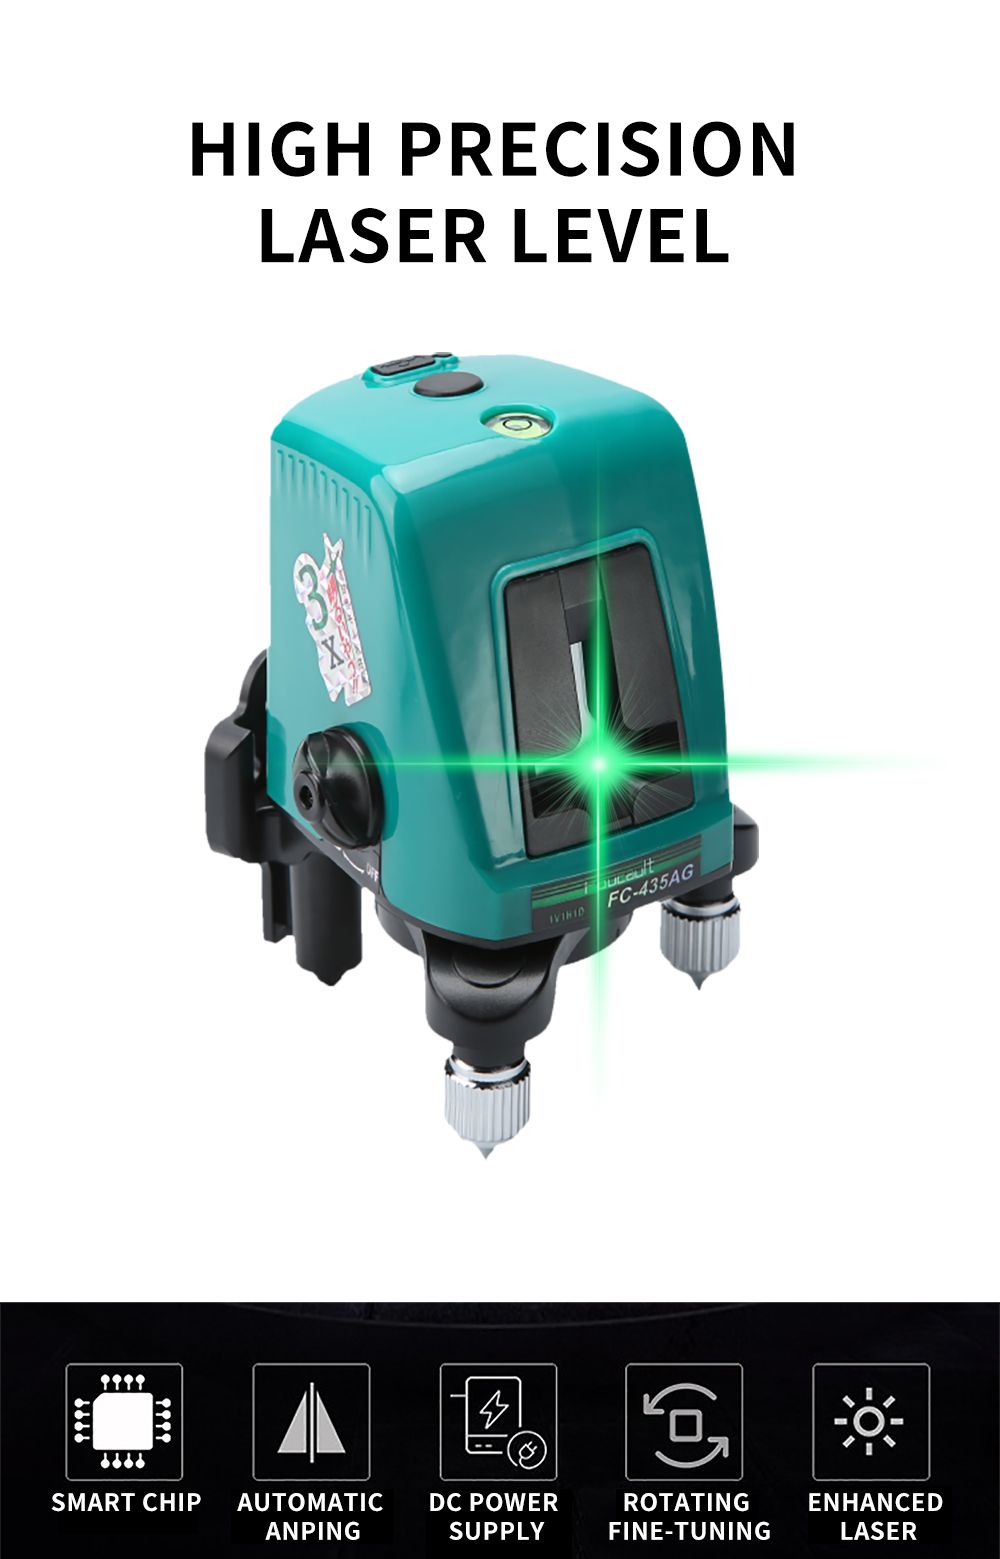 Foucault-FC-435AG-Mini-Infrared-Laser-Level-with-Oblique-Function-Line-Projector-2-Line-1-Brightenin-1567180